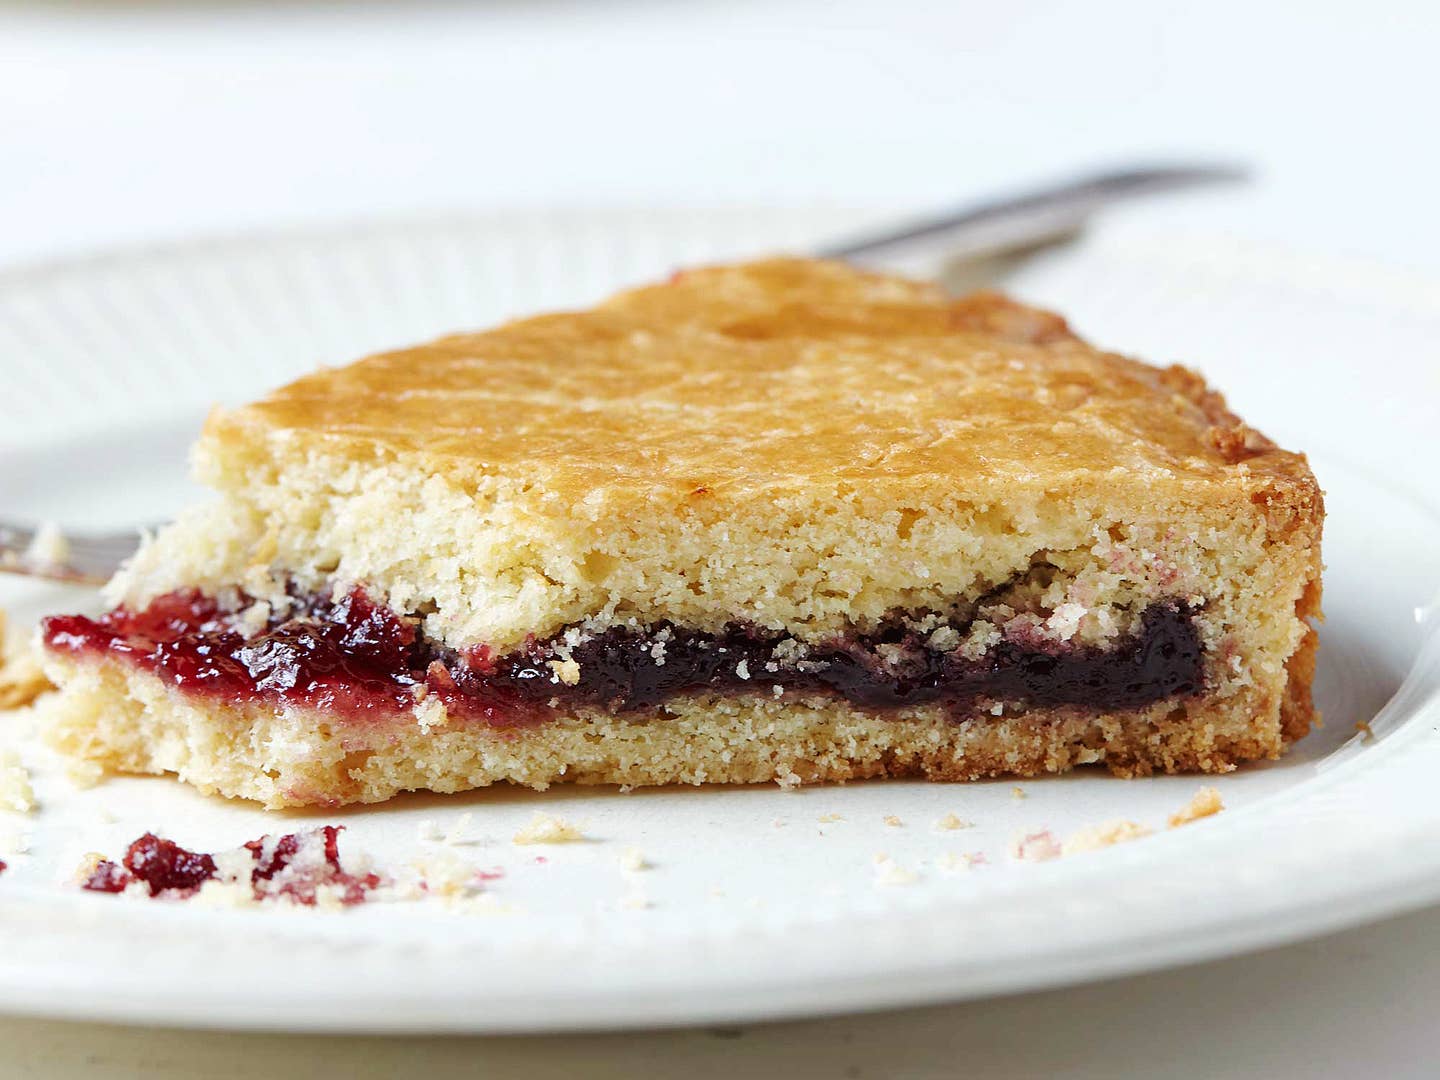 Go Make Pie With Jam While You’re Waiting for Fresh Fruit